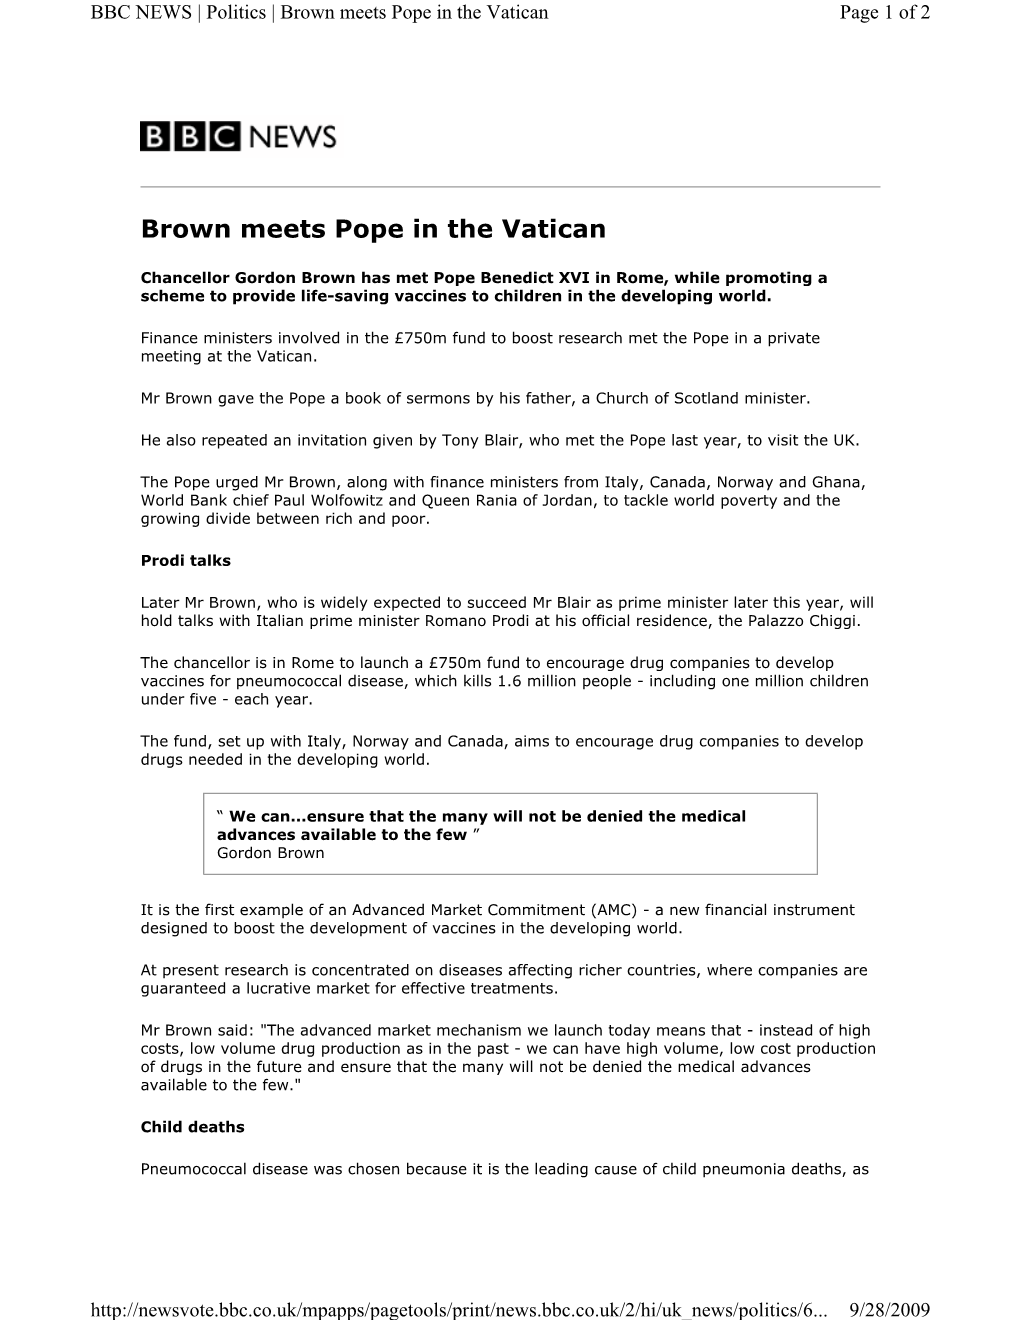 Brown Meets Pope in the Vatican Page 1 of 2